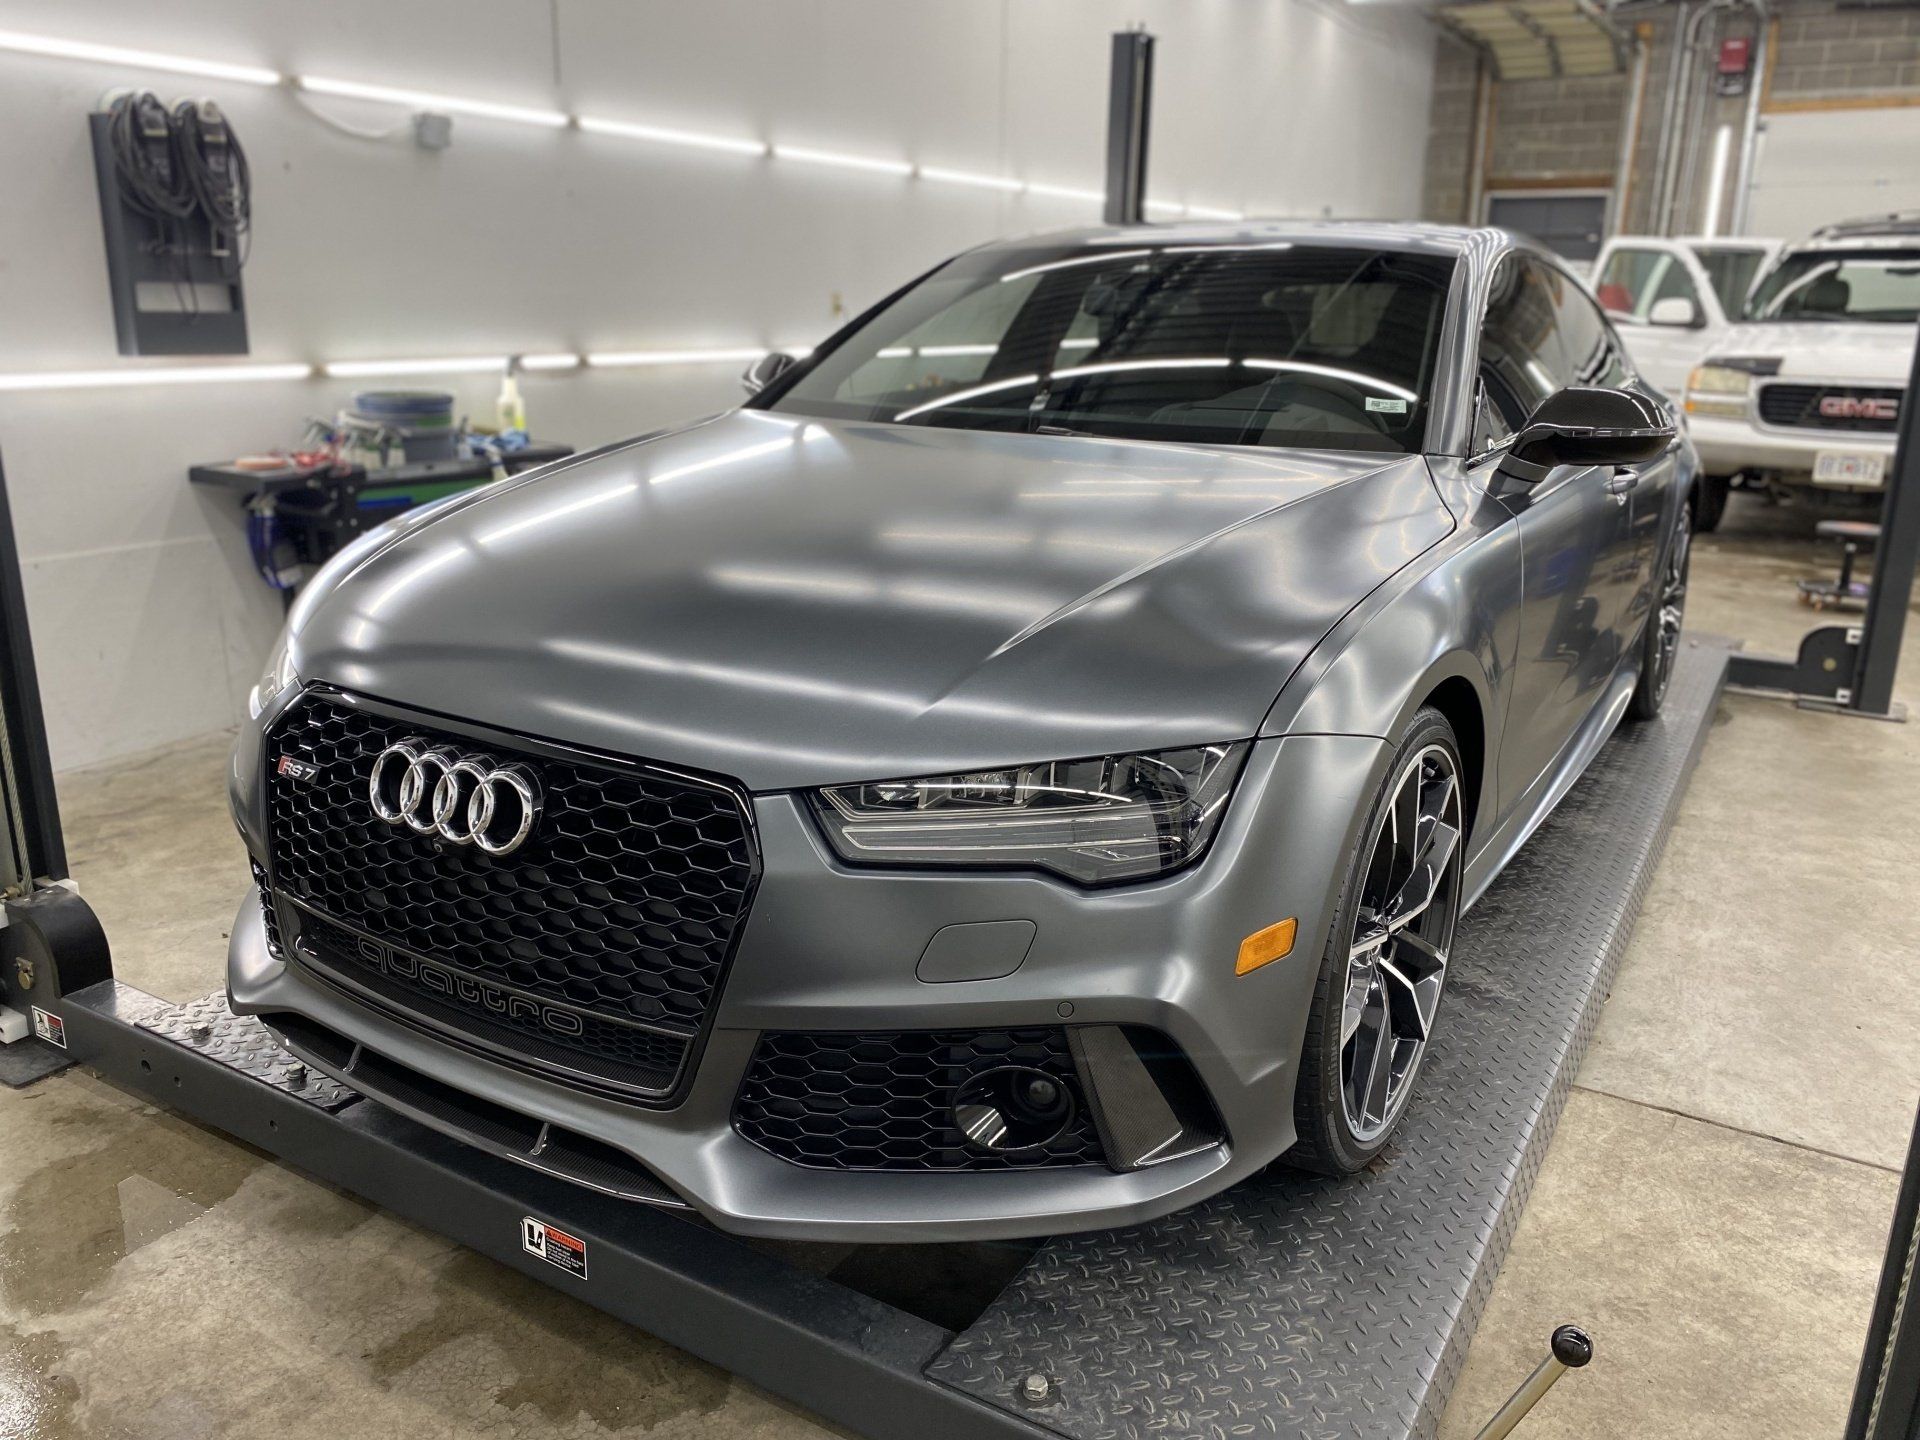 5 Tips To Choose The Best Car Detailing Service